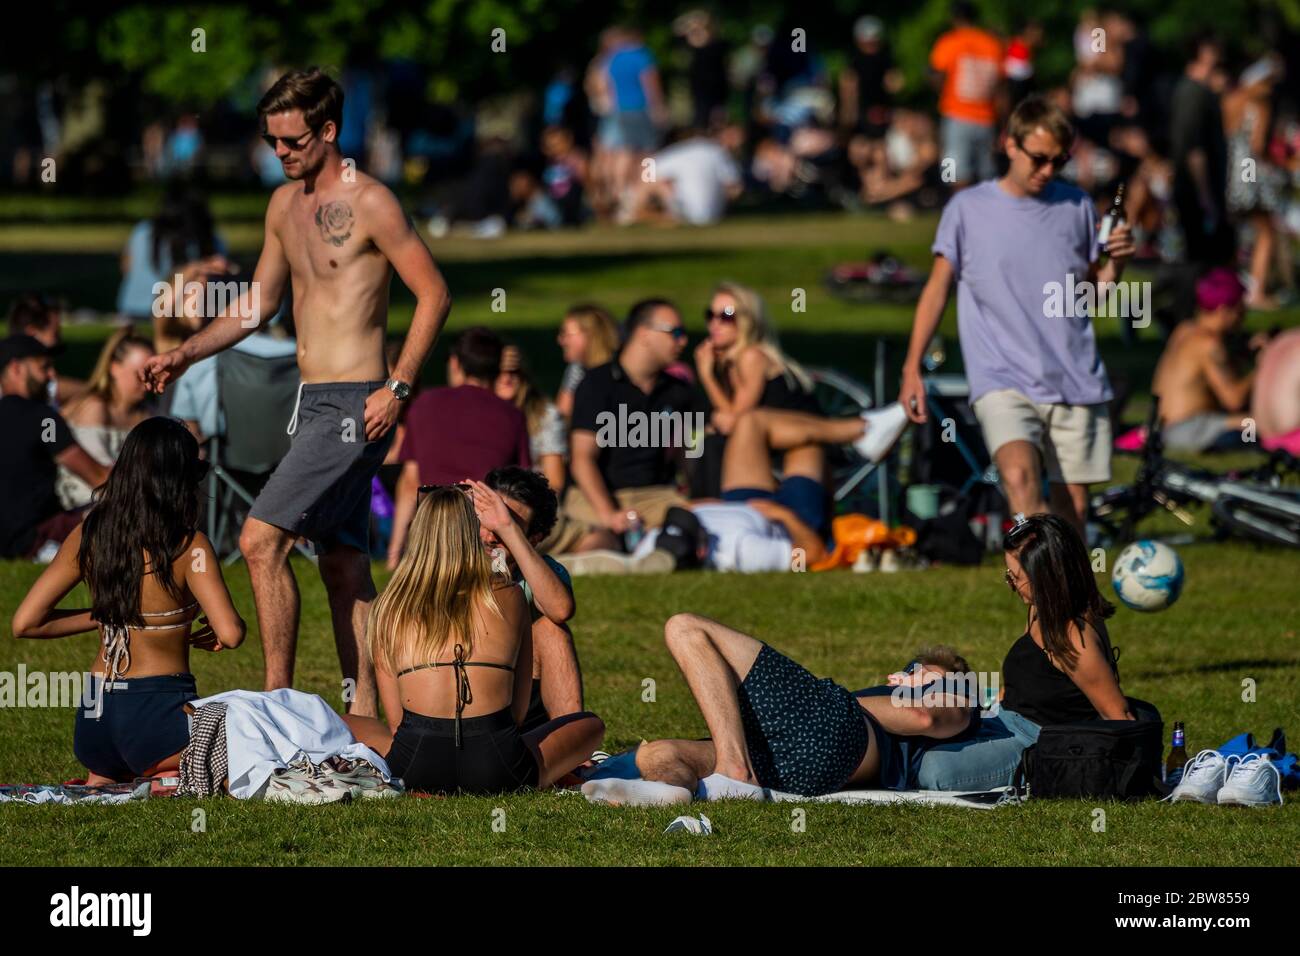 London, UK. 30th May, 2020. Large groups of people (against both current and future guidance) enjoy the sun on Clapham Common after the Government eased restrictions and allowed people to meet - Lambeth Council have replaced signs to say stay alert and to allow people sit on benches. The eased 'lockdown' continues for the Coronavirus (Covid 19) outbreak in London. Credit: Guy Bell/Alamy Live News Stock Photo